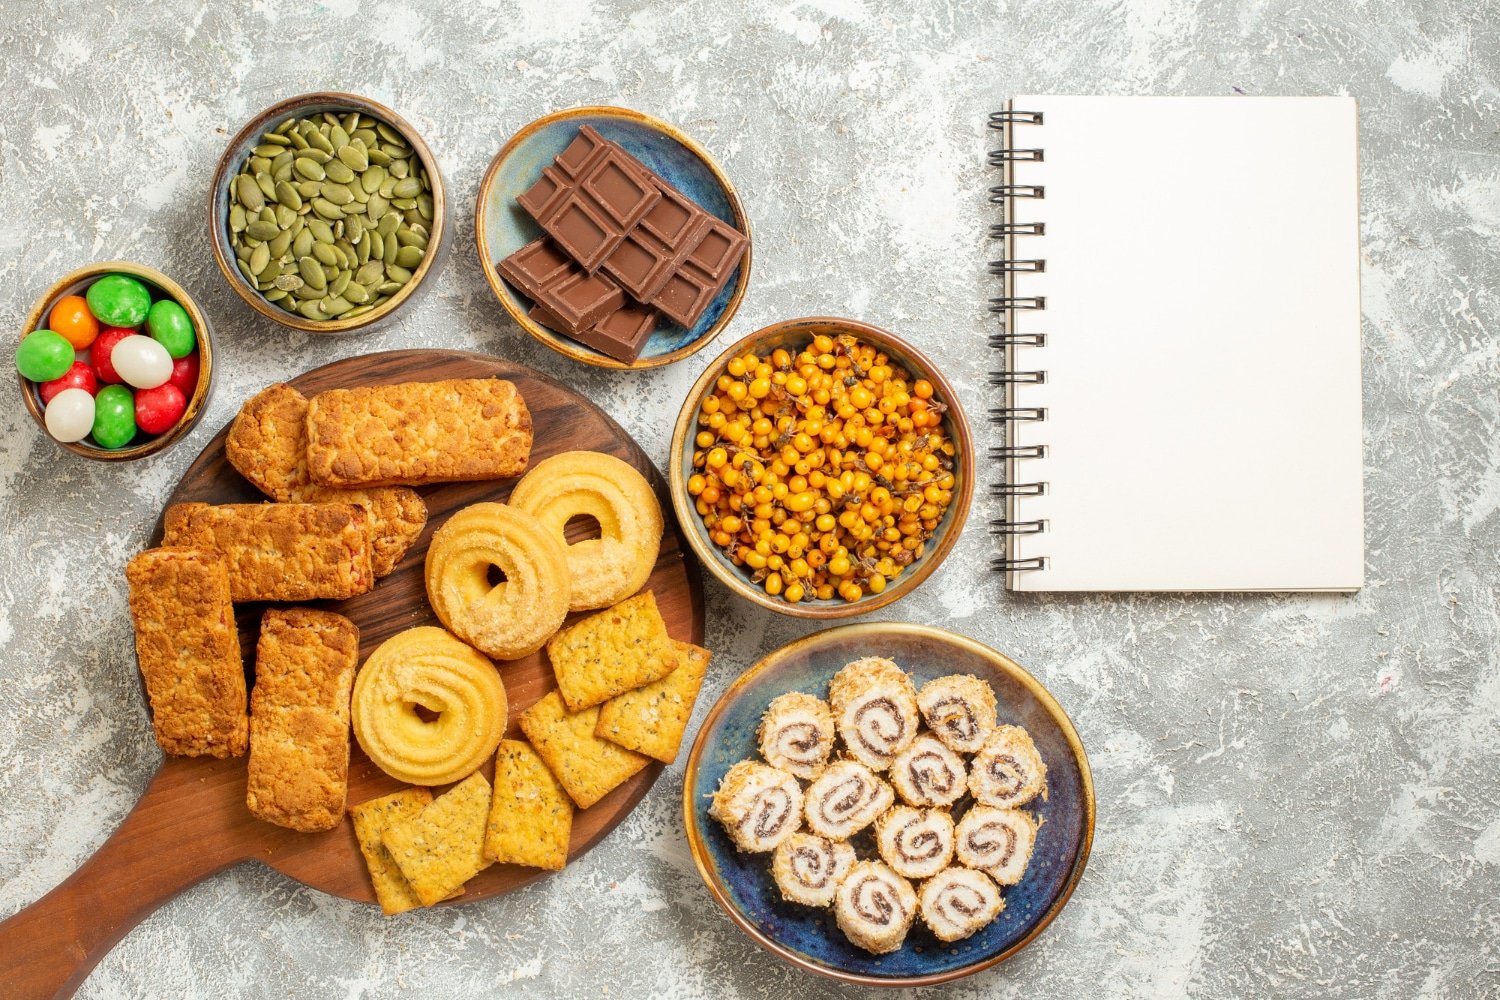 Snack Healthily With Gooder Foods’s Nutritious Snacks